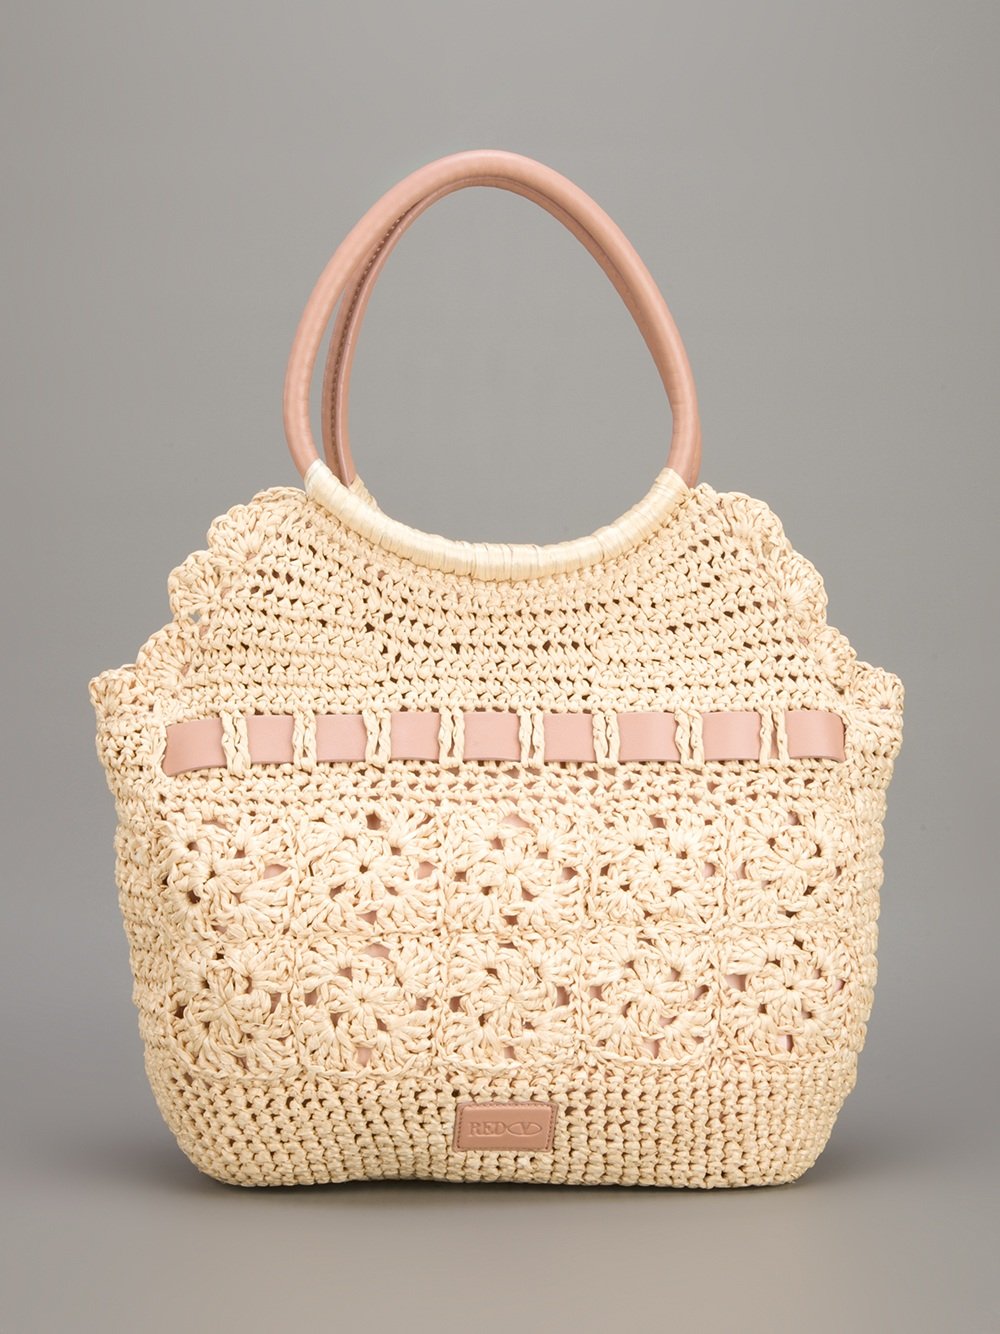 RED Valentino Woven Straw Tote Bag in Natural - Lyst